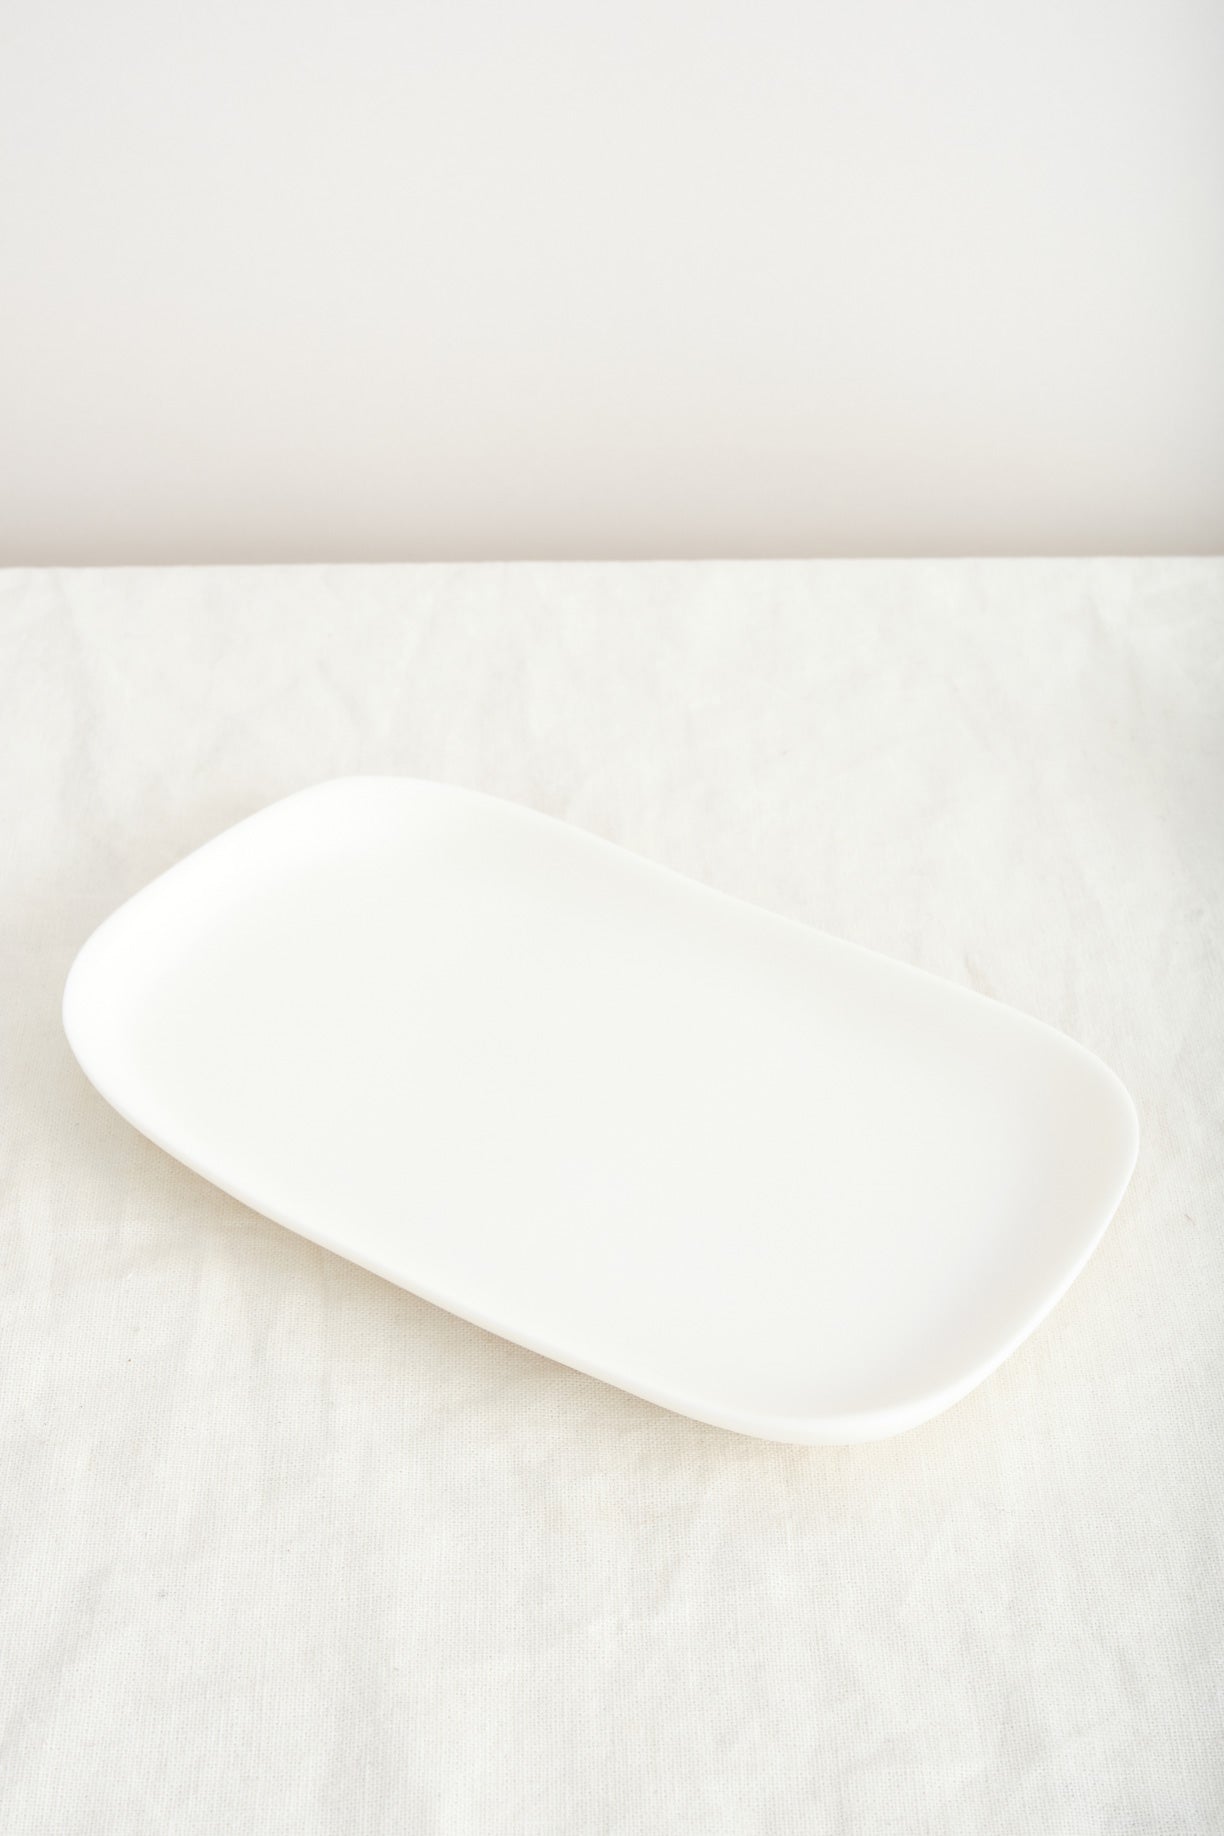 Tina Frey Designs Guest Towel Tray White